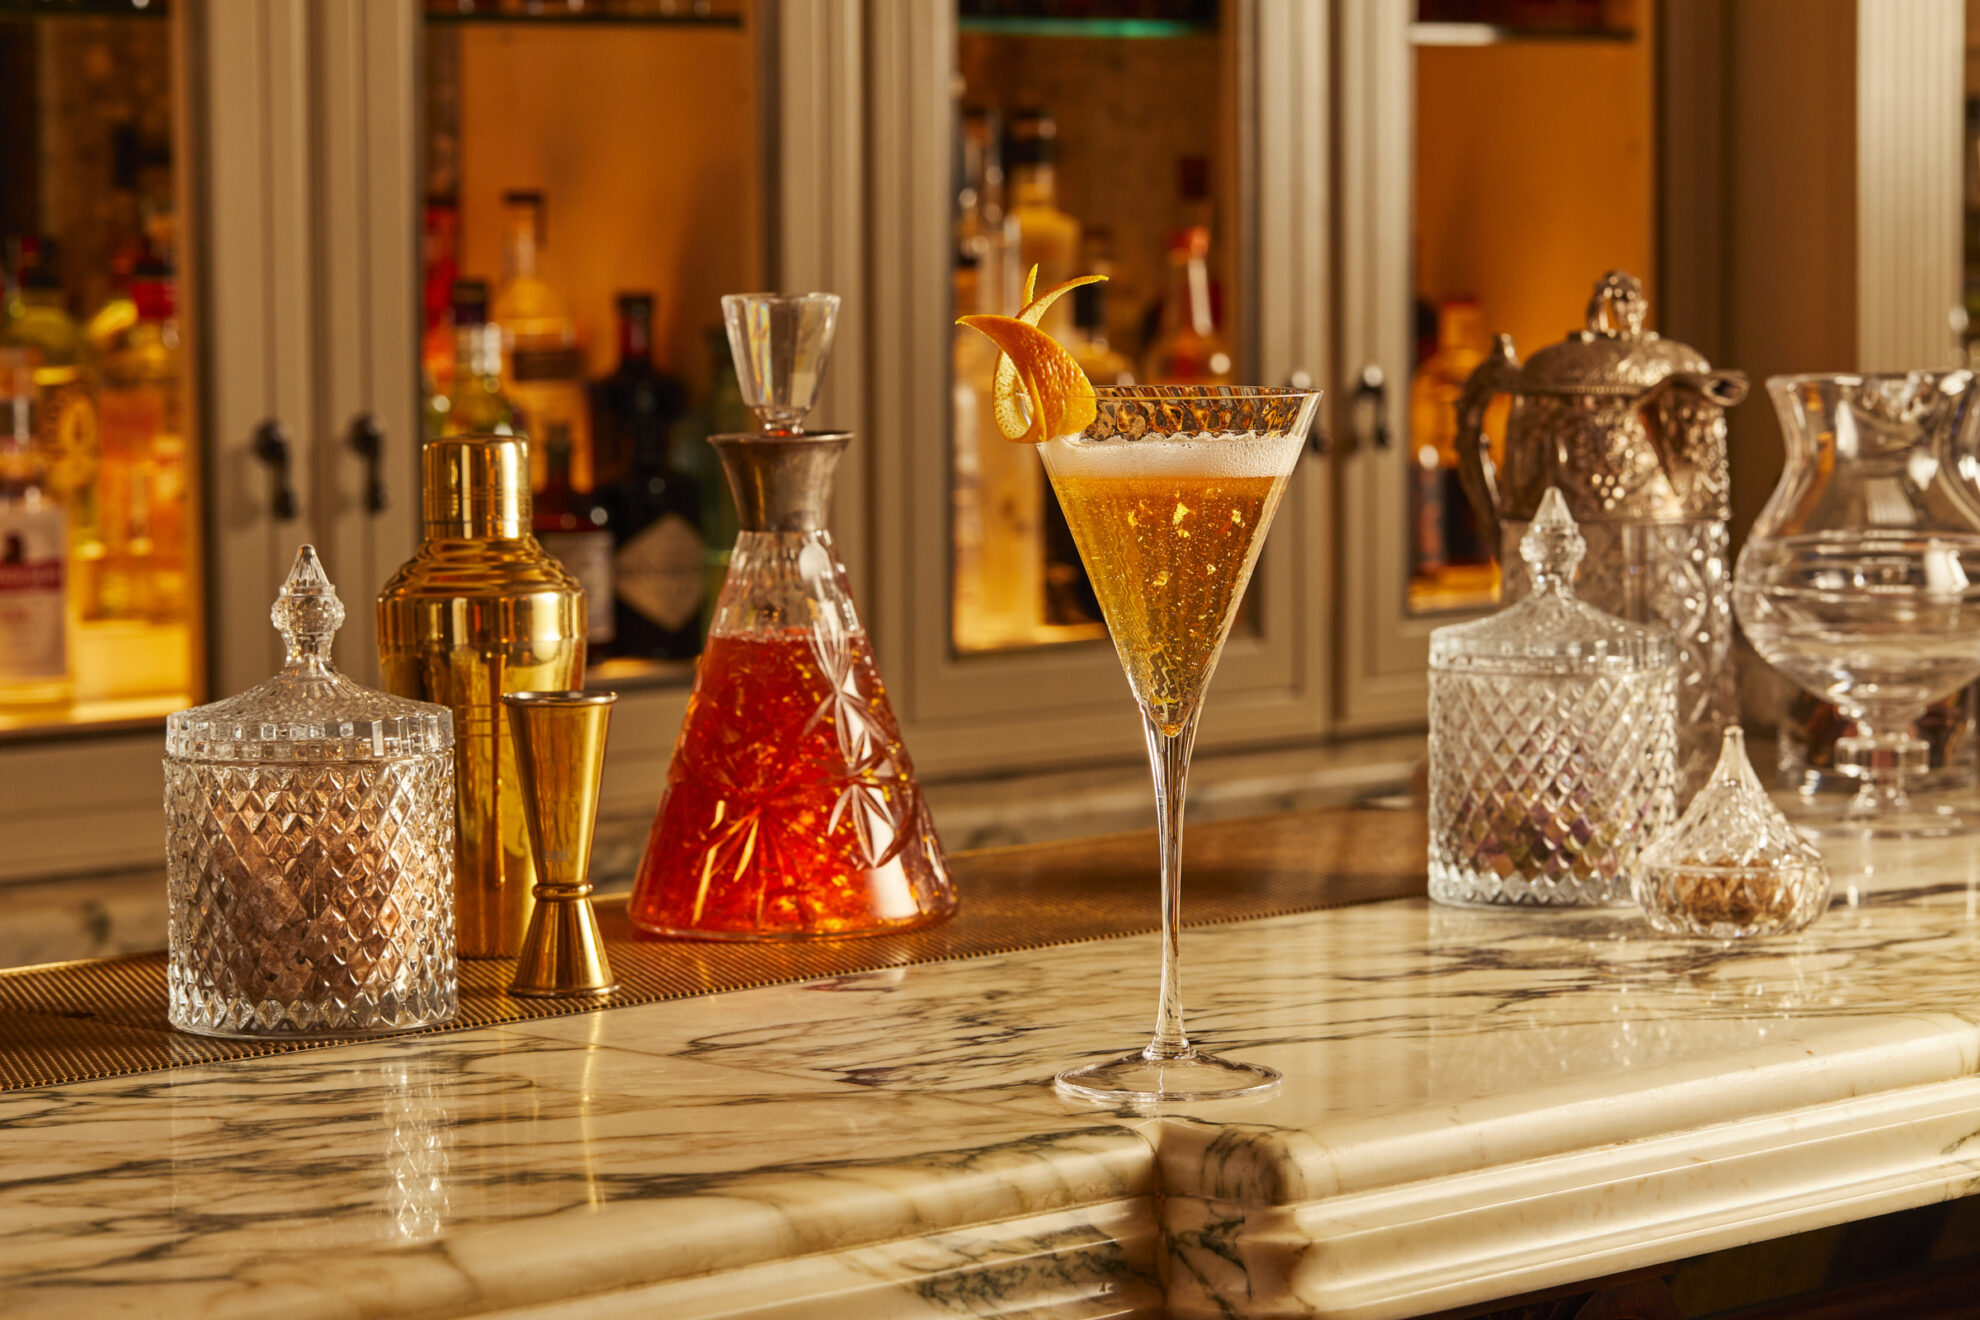 The Jubilee Fizz at The Goring